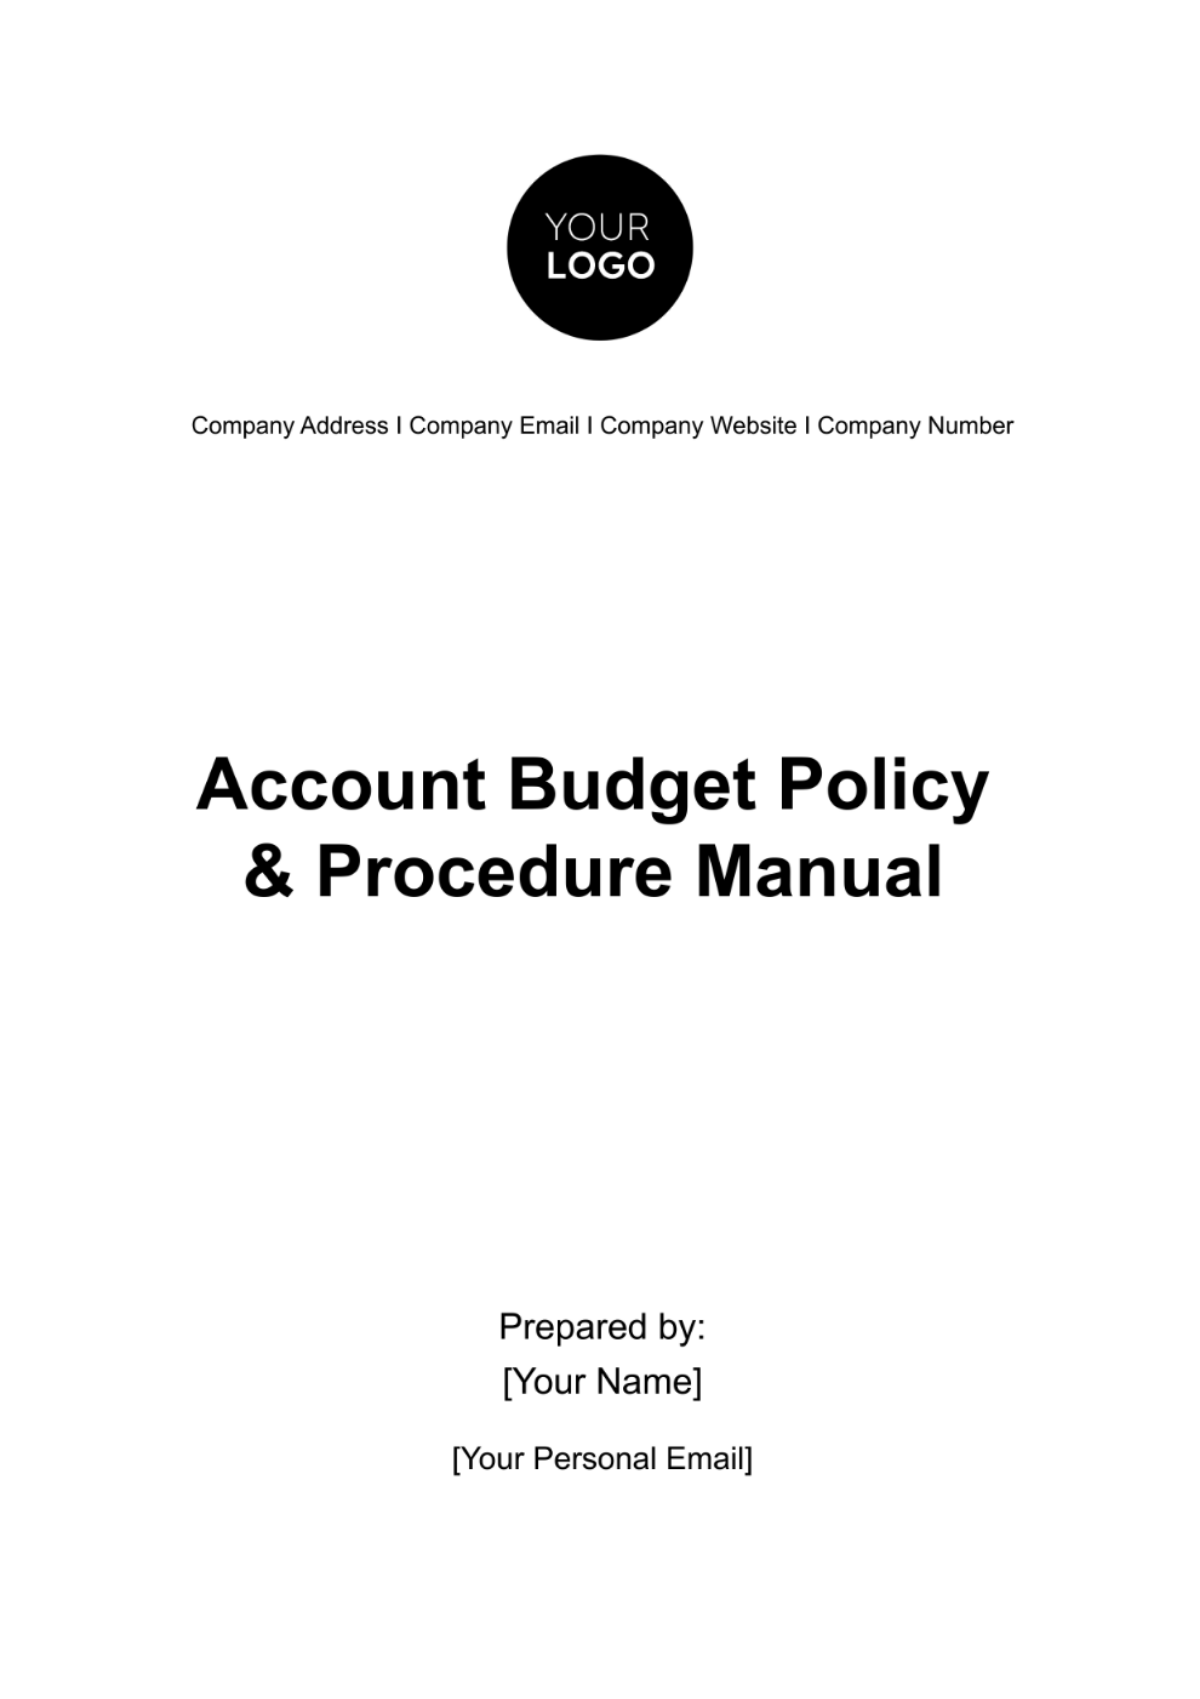 Account Budget Policy & Procedure Manual Template